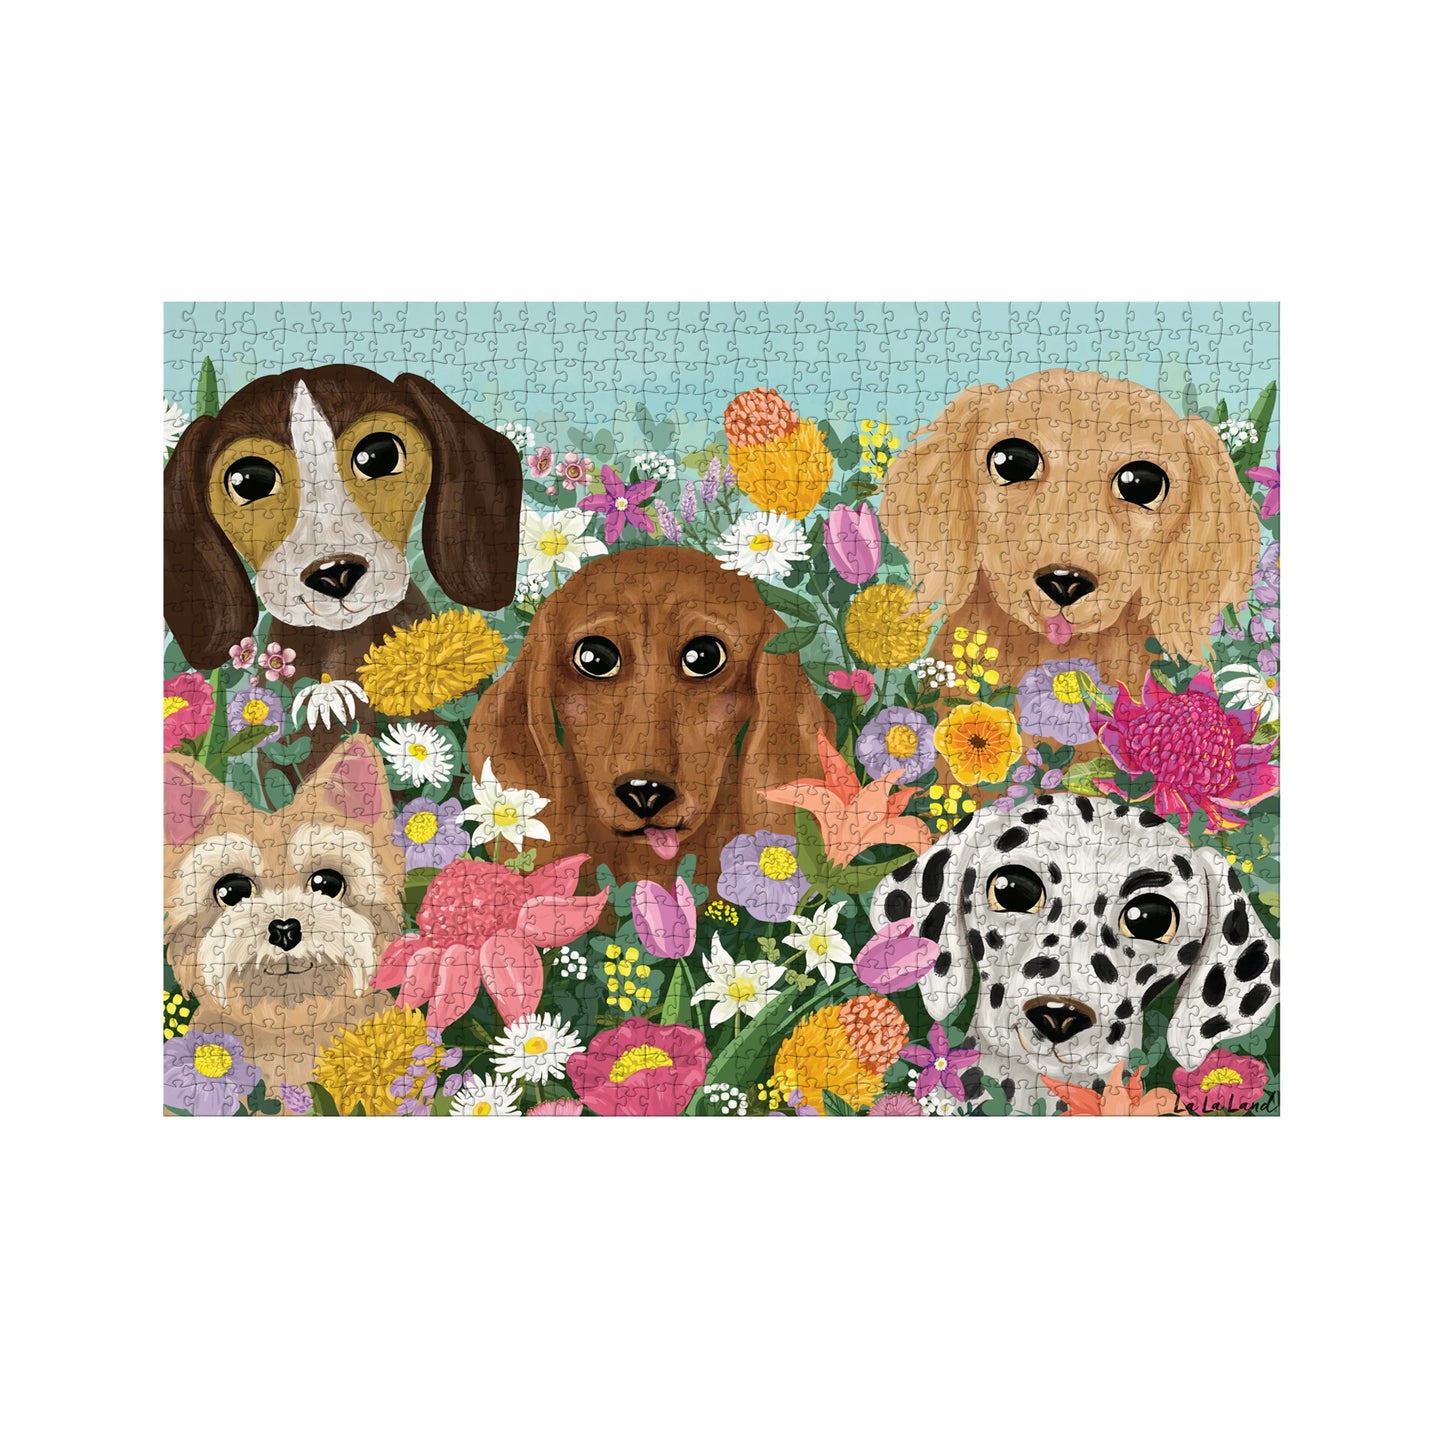 Sniff Sniff Woof Woof Puzzle - A Delightful 1000 Piece Puzzle for Puzzlers and Dog Lovers!